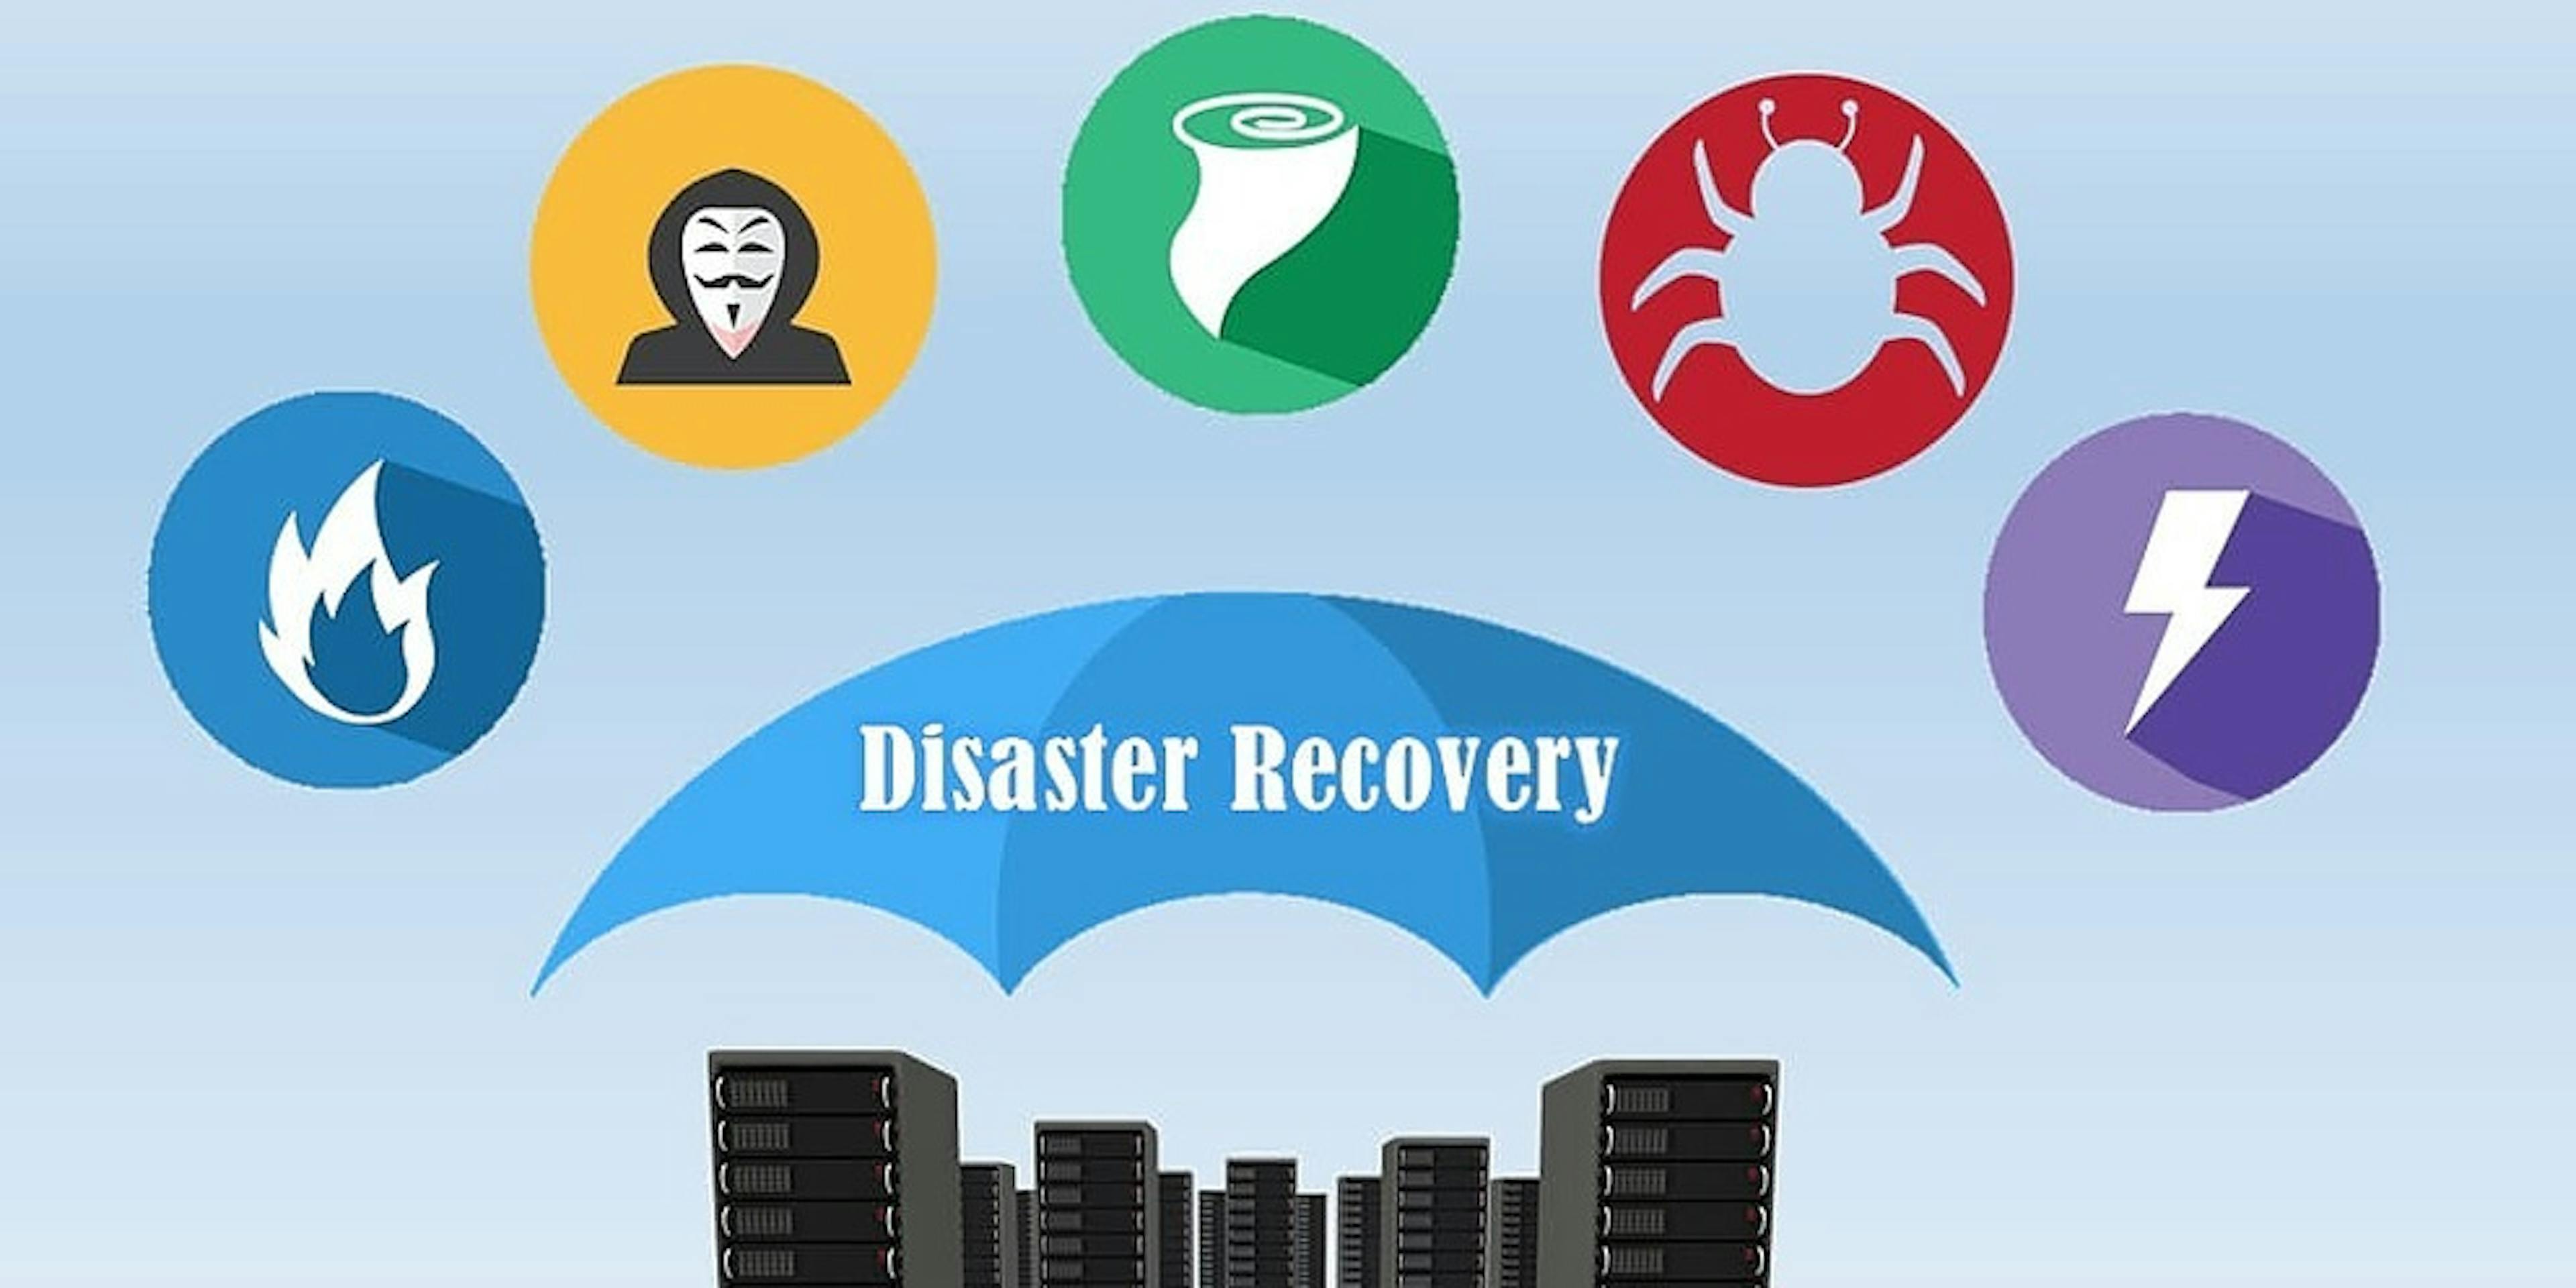 /8-steps-to-creating-a-disaster-recovery-plan-for-your-business-qx5xz30o8 feature image